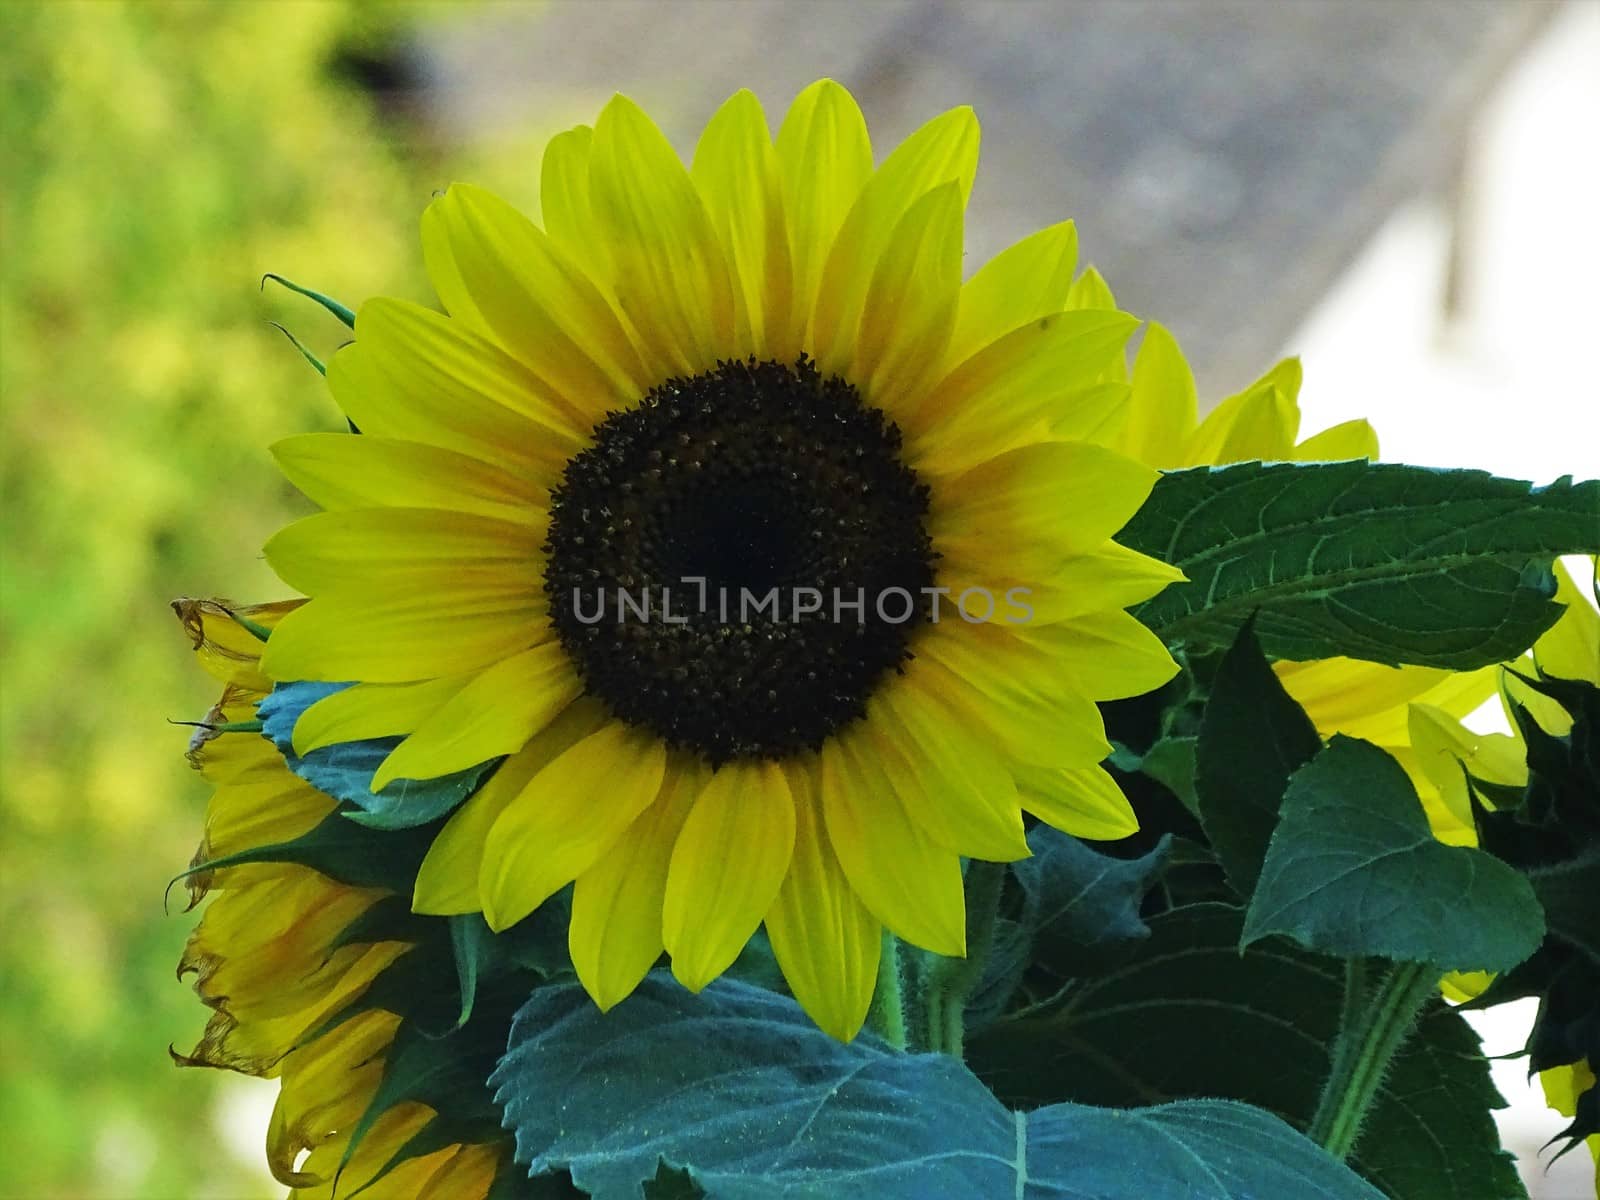 Fully blooming sunflower blossom spotted in Germany by pisces2386